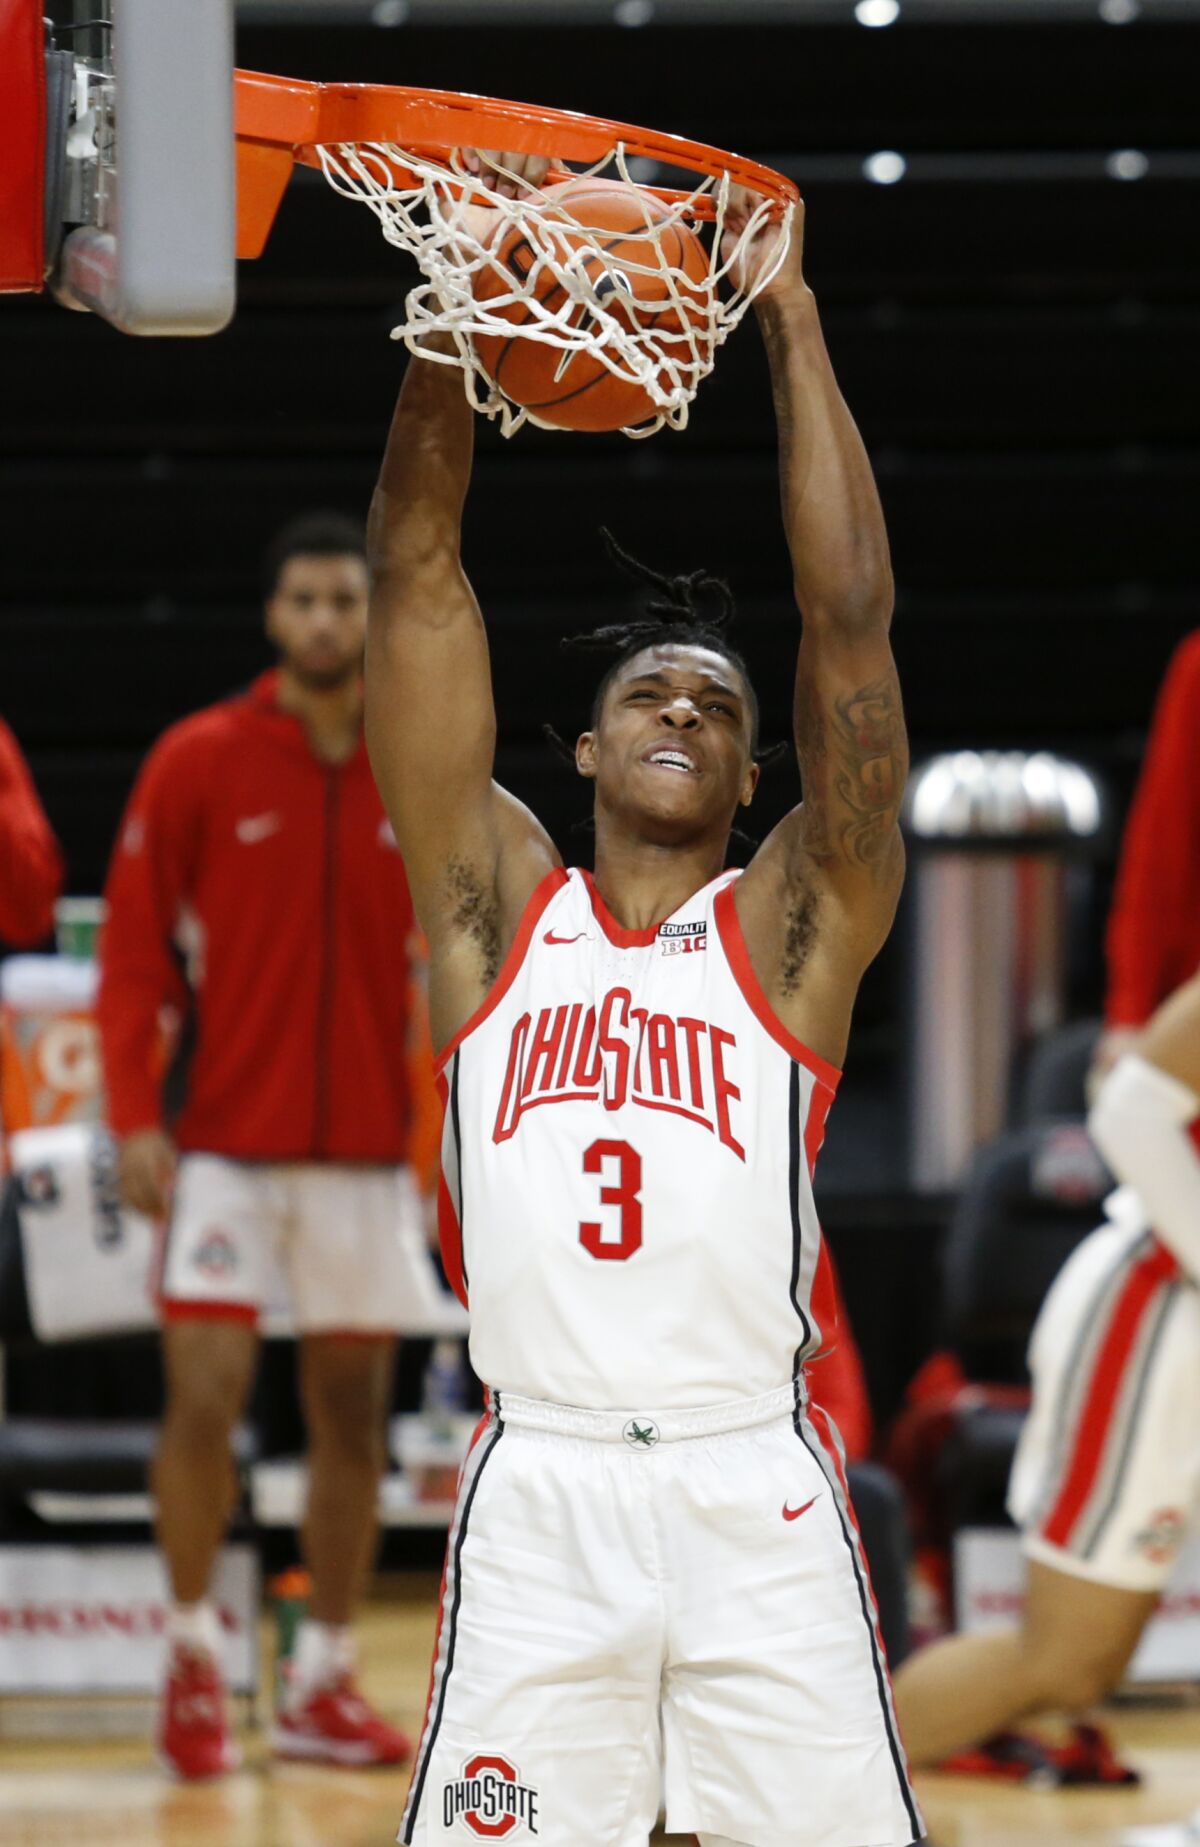 Ohio State guard Eugene Brown dunks against Morehead State during the second half of an NCAA college basketball game in Columbus, Ohio, Wednesday, Dec. 2, 2020. Ohio State won 77-44. (AP Photo/Paul Vernon)